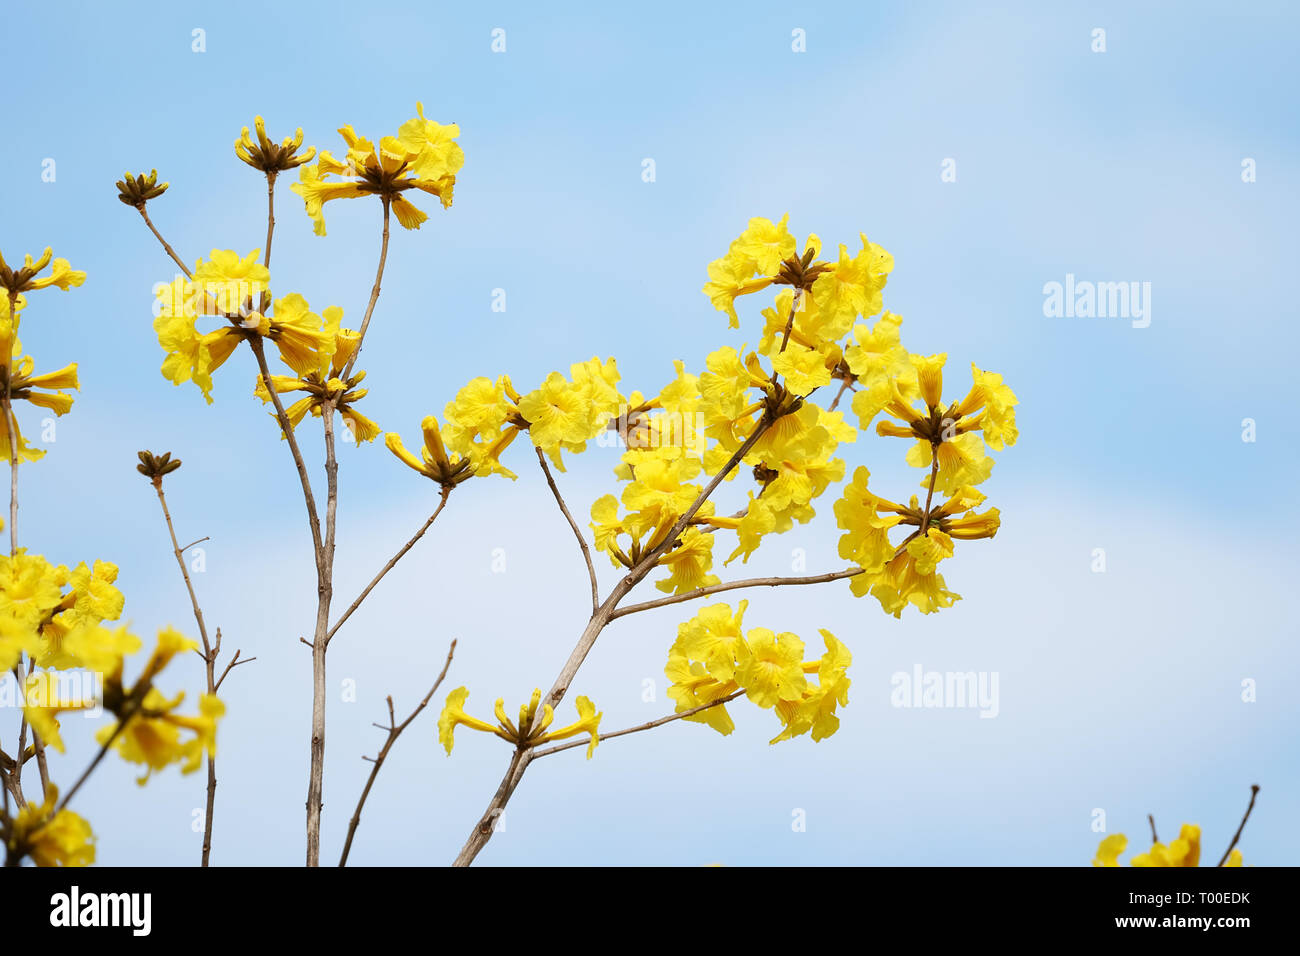 Tabebuia chrysotricha yellow flowers blossom in spring Stock Photo